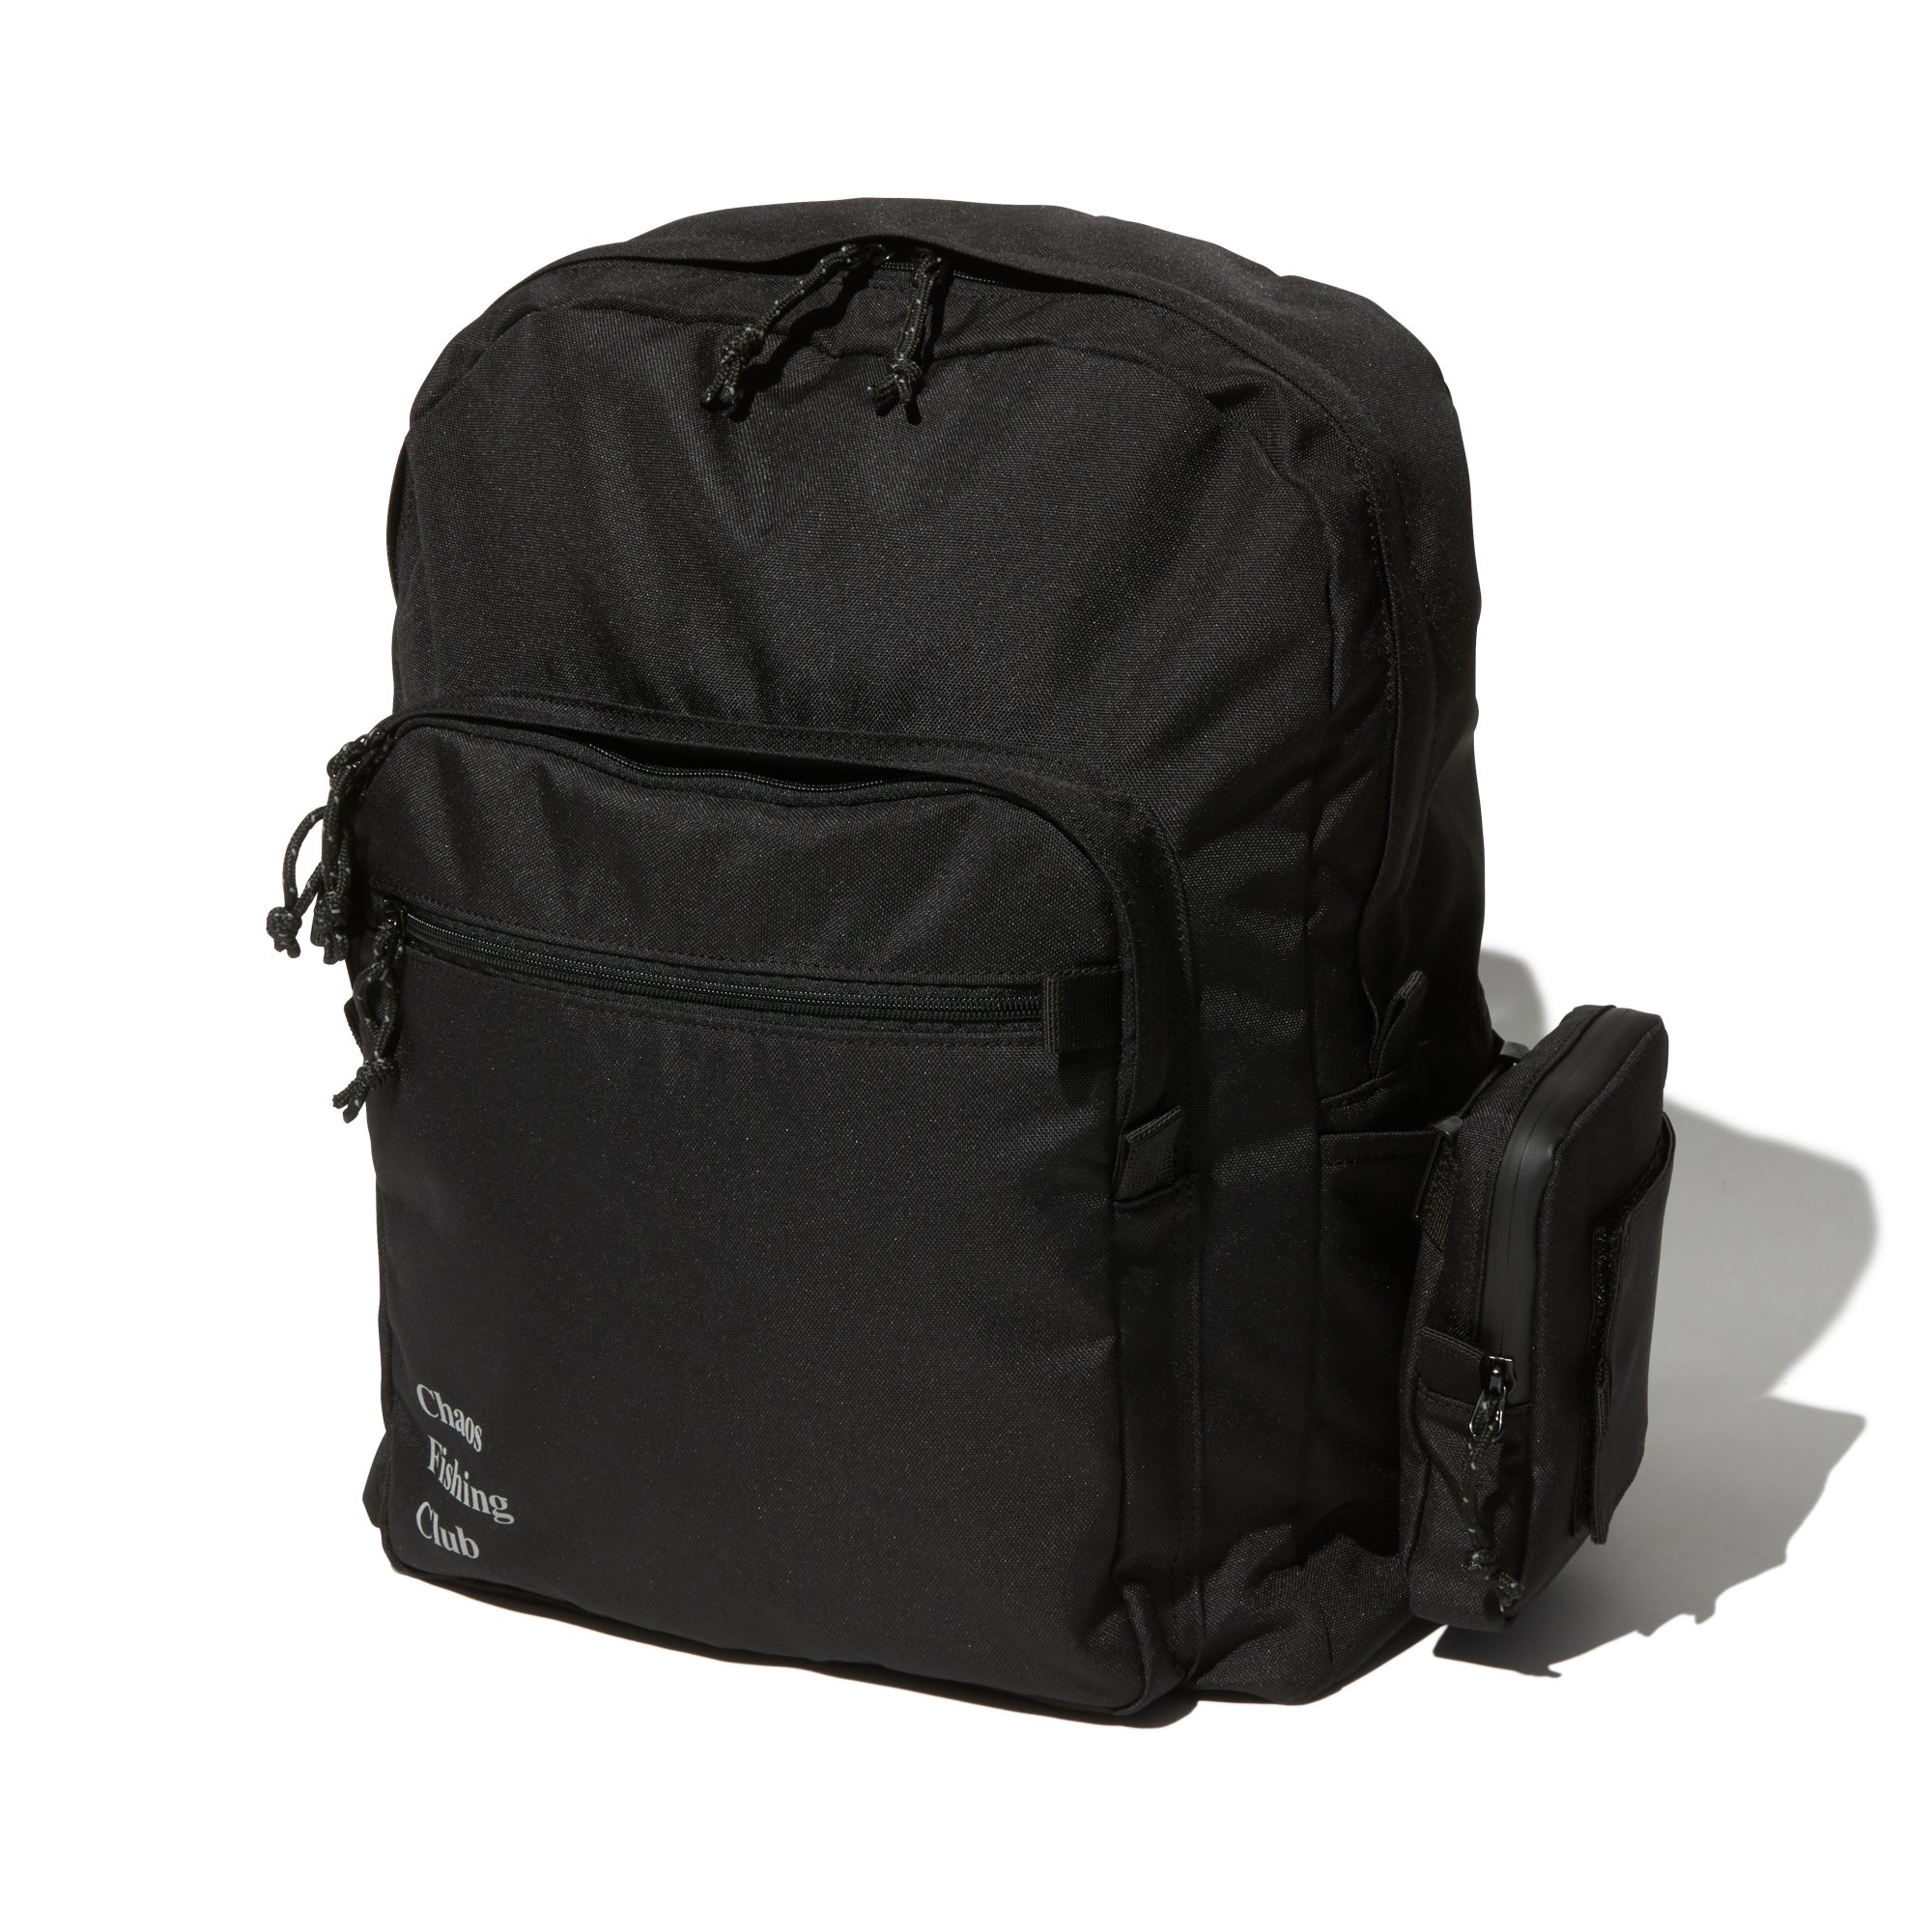 Chaos Fishing Club<br>WANOPE BACKPACK<br>